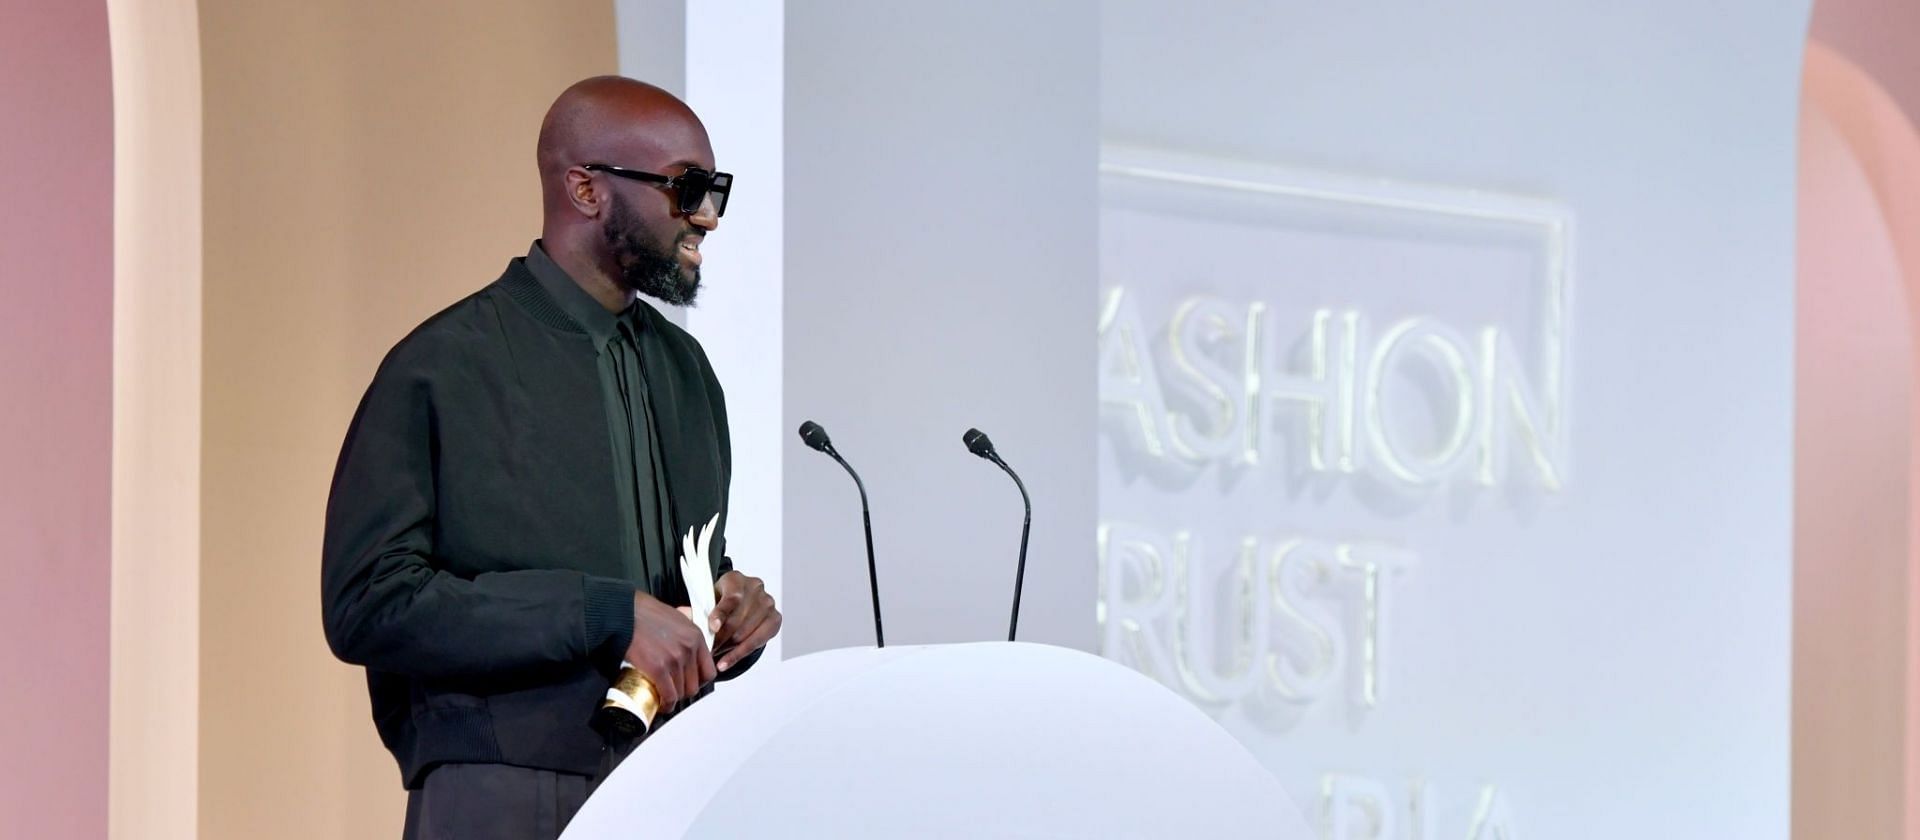 Virgil Abloh&#039;s untimely demise leaves the fashion industry devastated (Image via Getty Images/Craig Barritt)